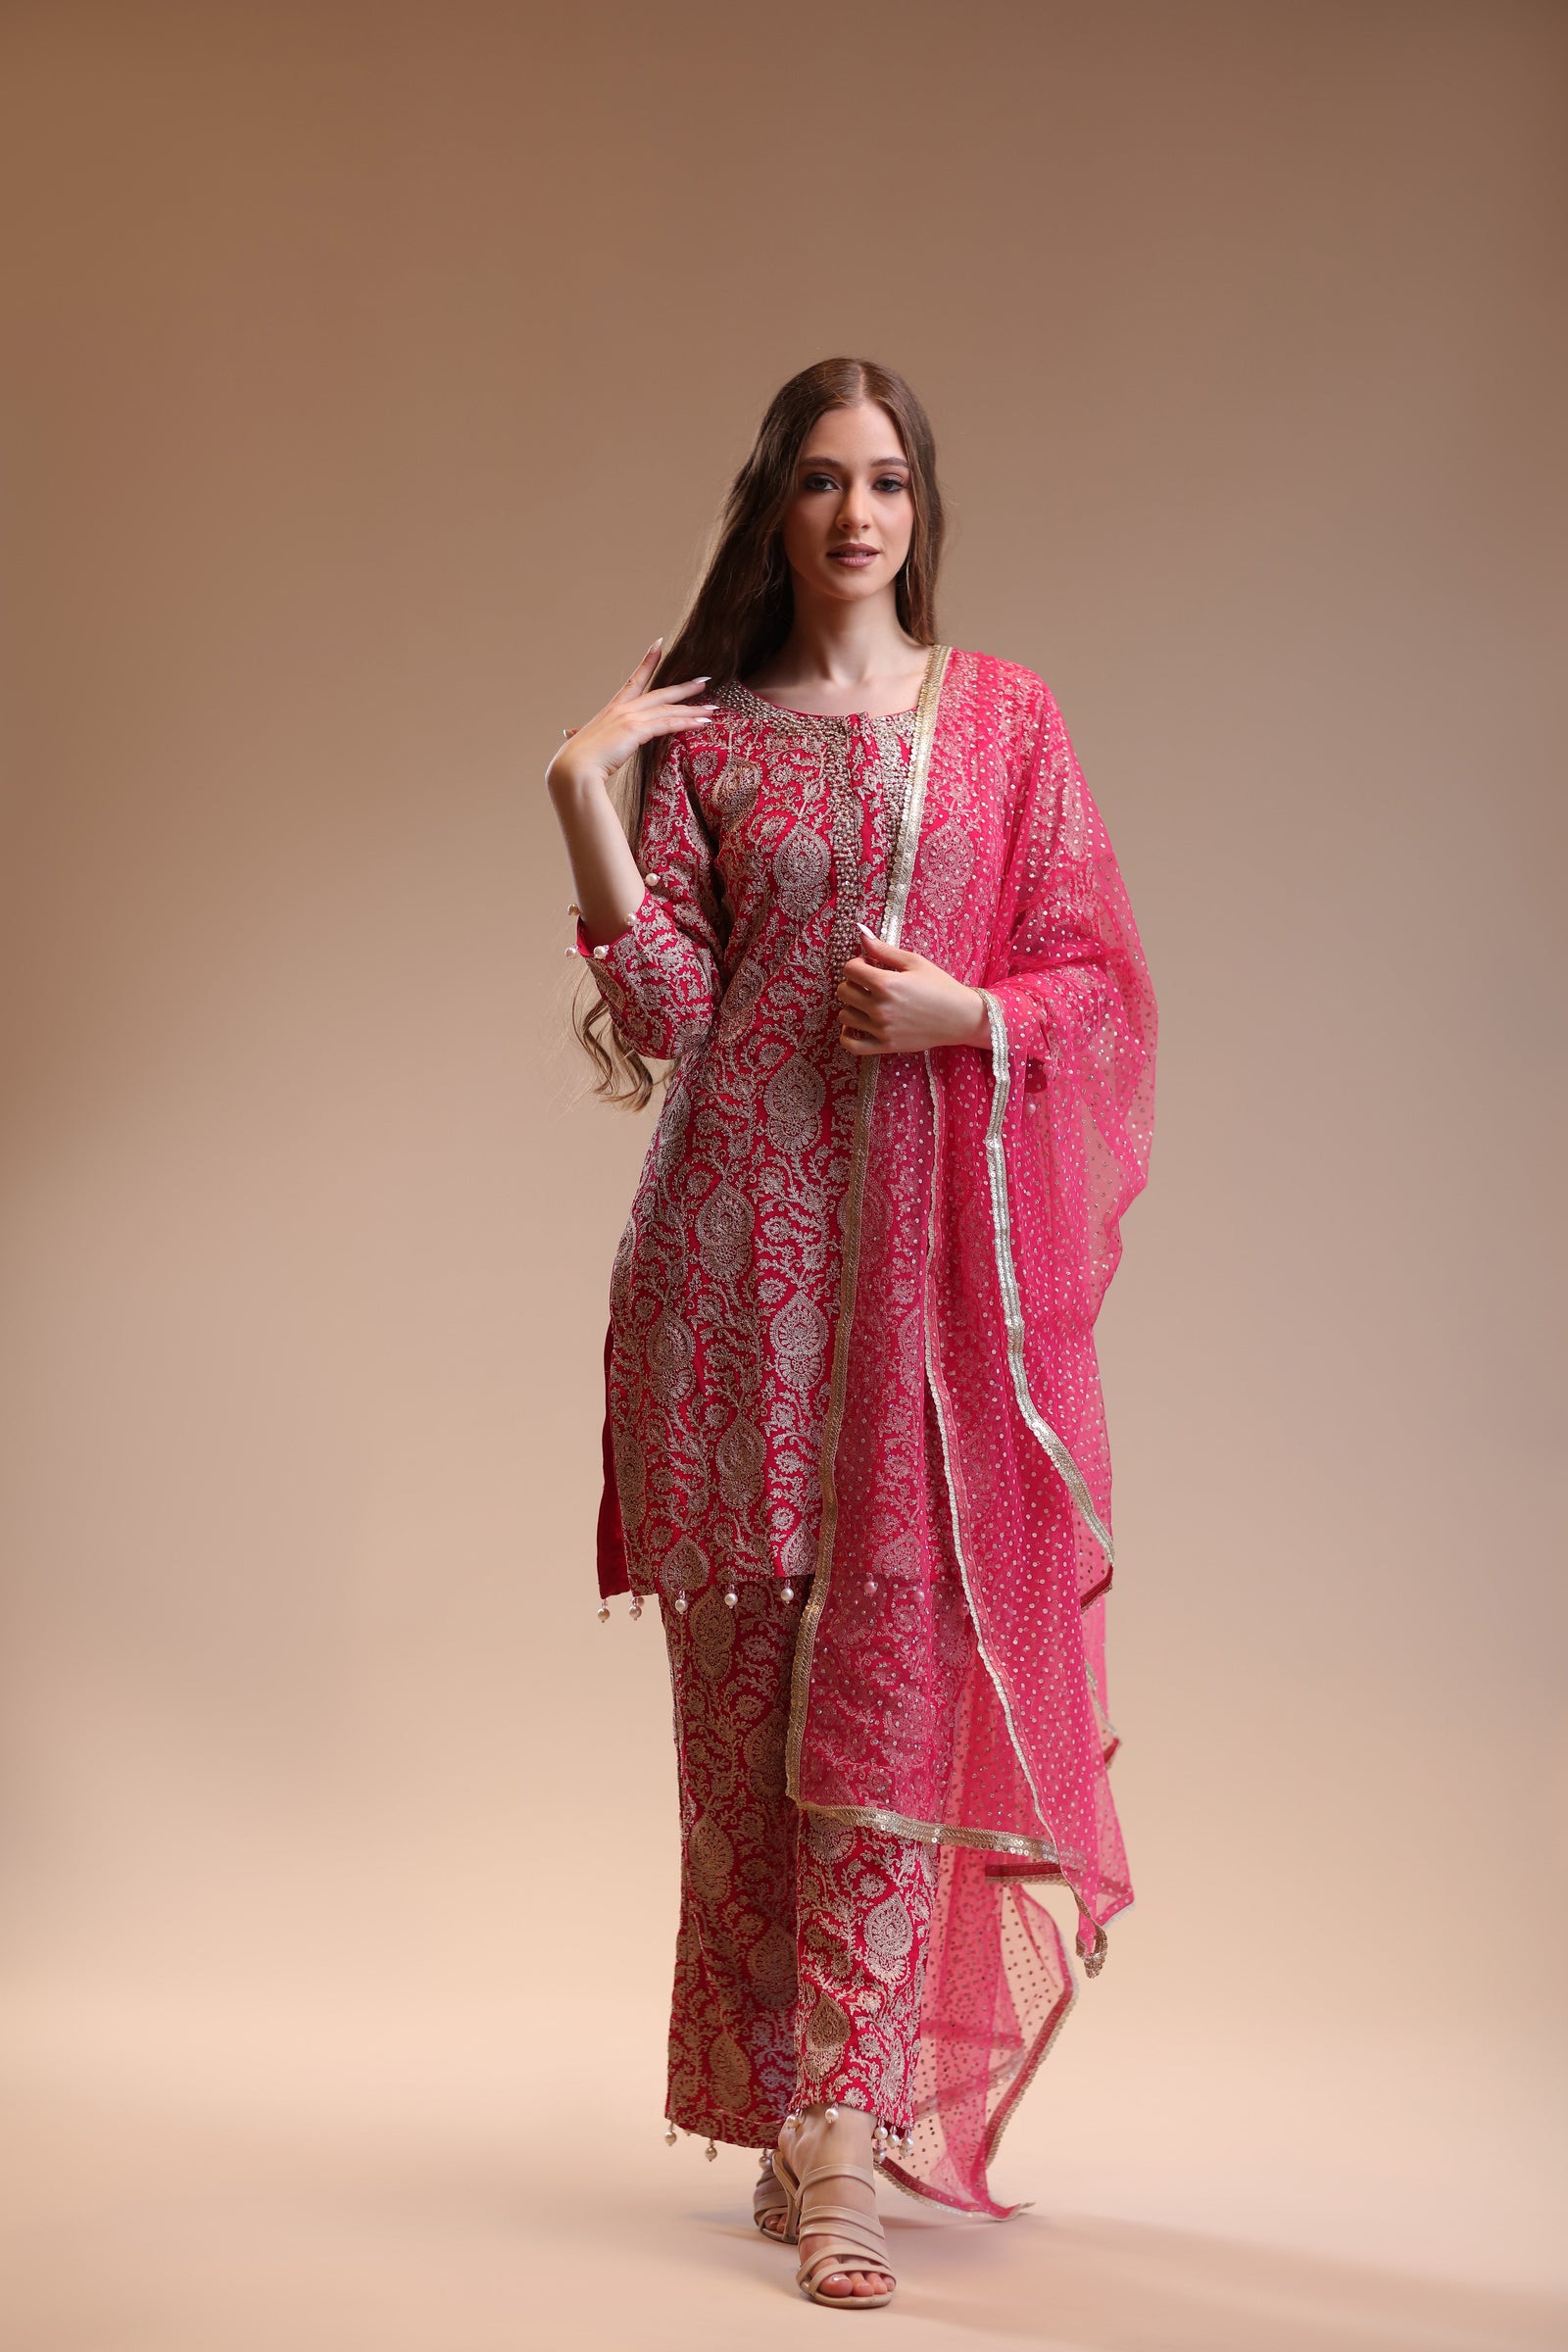 Classic Shocking Pink Ensemble of Embellished Kameez And Trousers